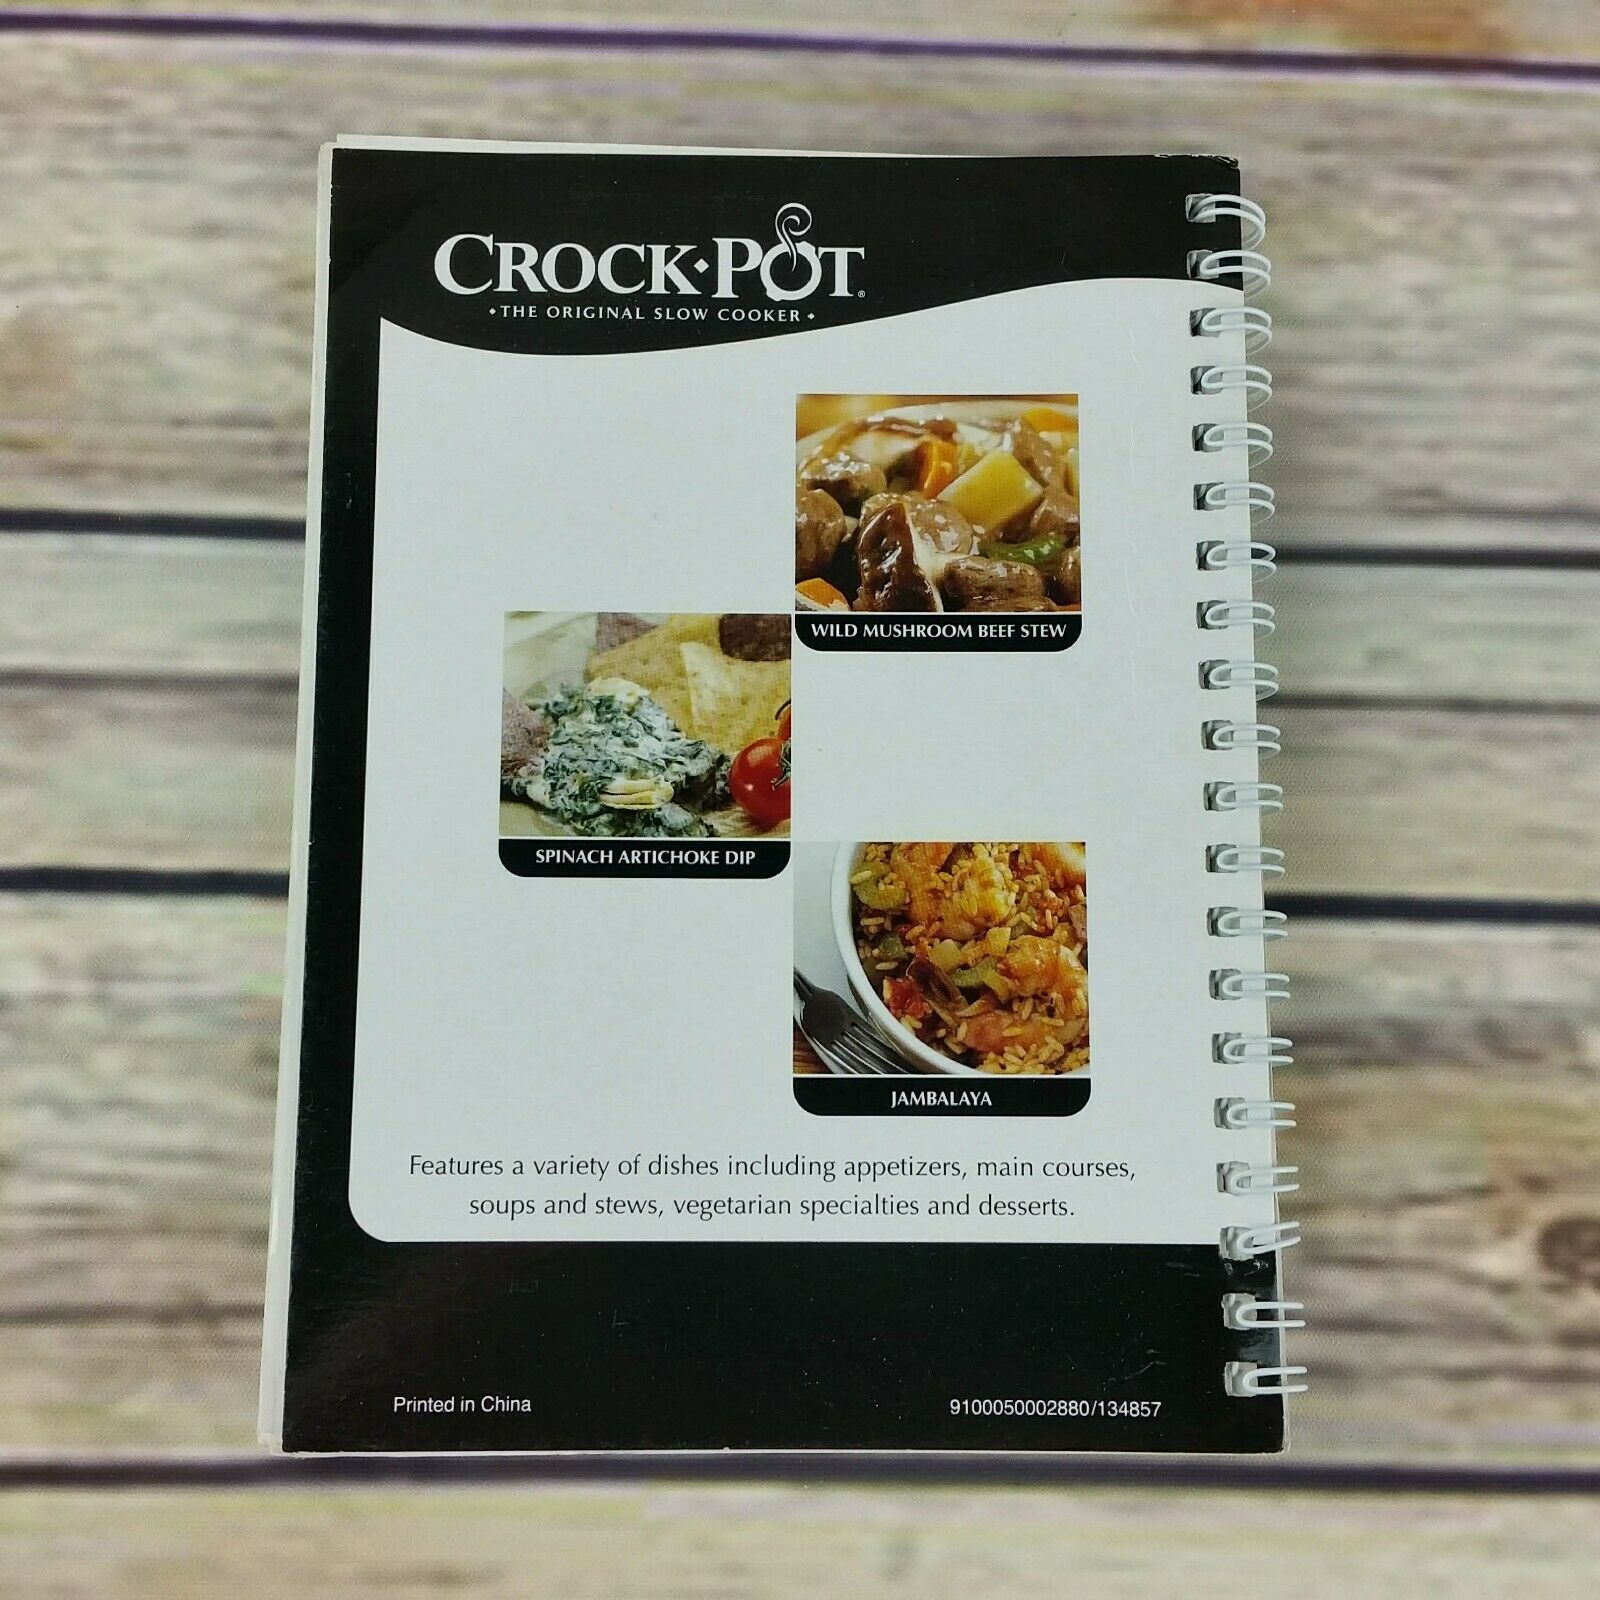 Crock Pot Slow Cooker Cookbook Recipes 2009 Owners Manual Appetizers Desserts - At Grandma's Table